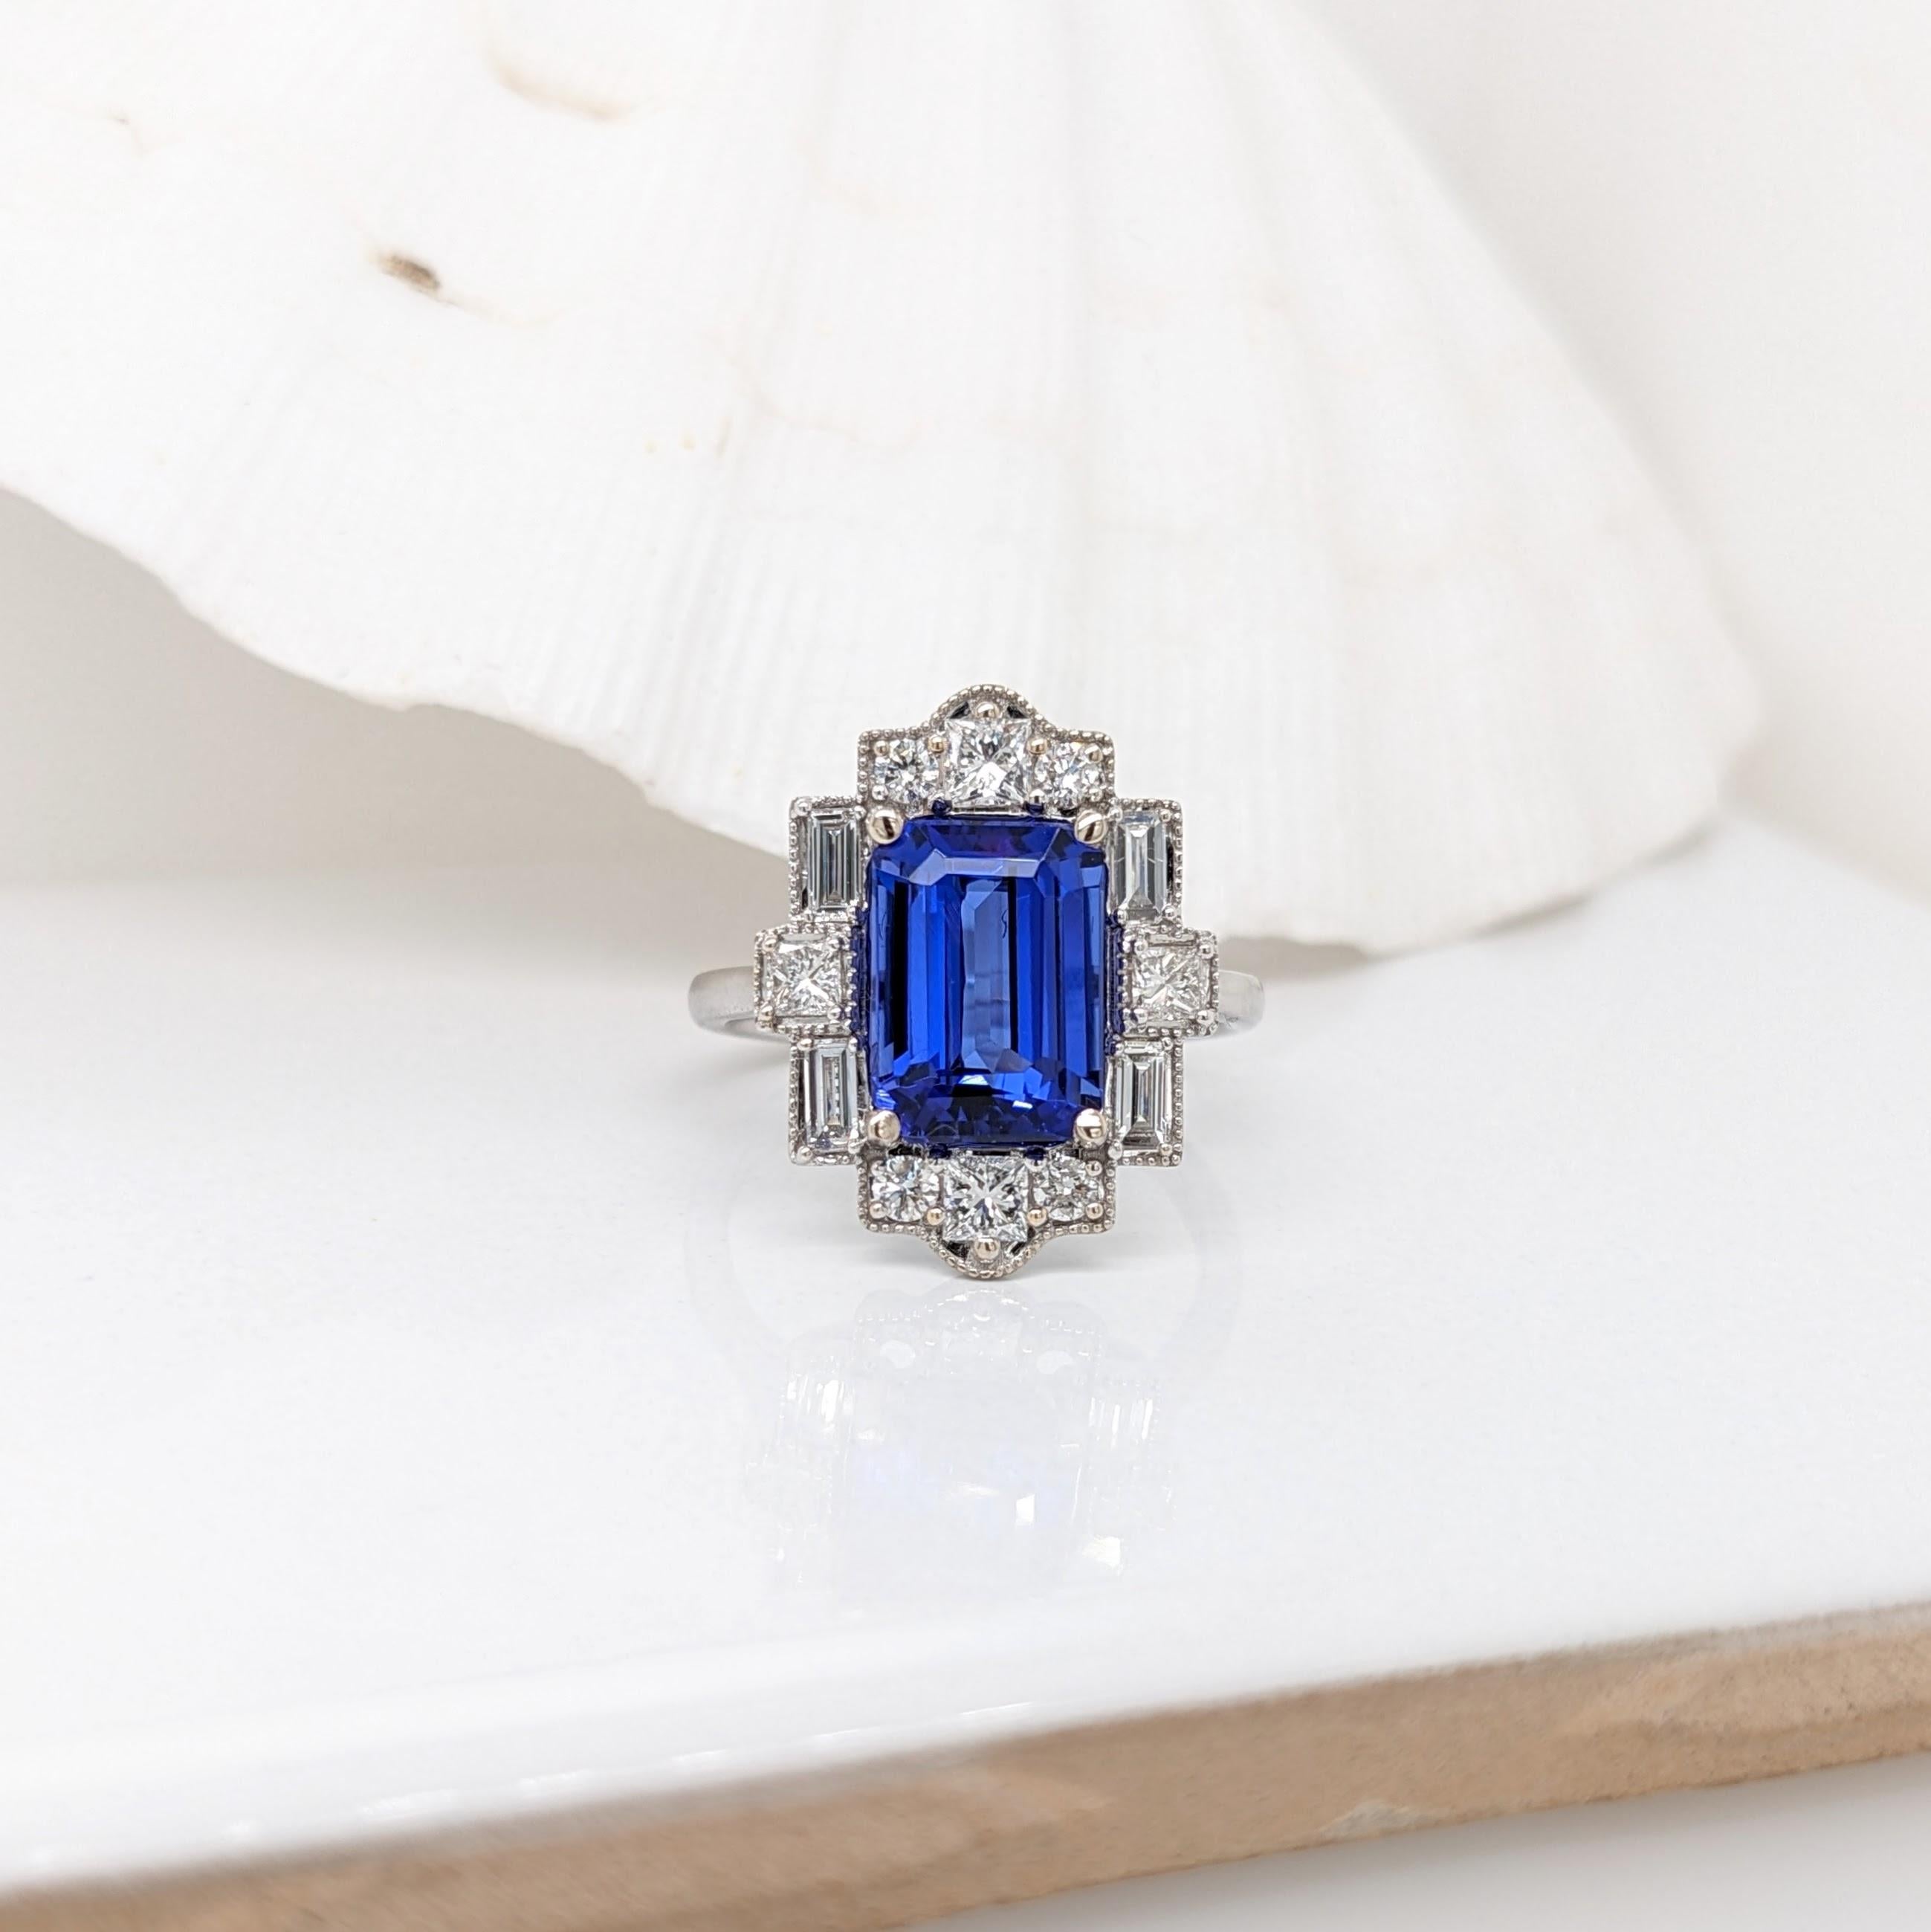 A gorgeous art deco style ring featuring an emerald cut tanzanite with a rich blue color that can compete with a stunning sapphire! An original ring design featuring a halo of mixed diamond shapes and milgrain detailing all in 14k white gold, this